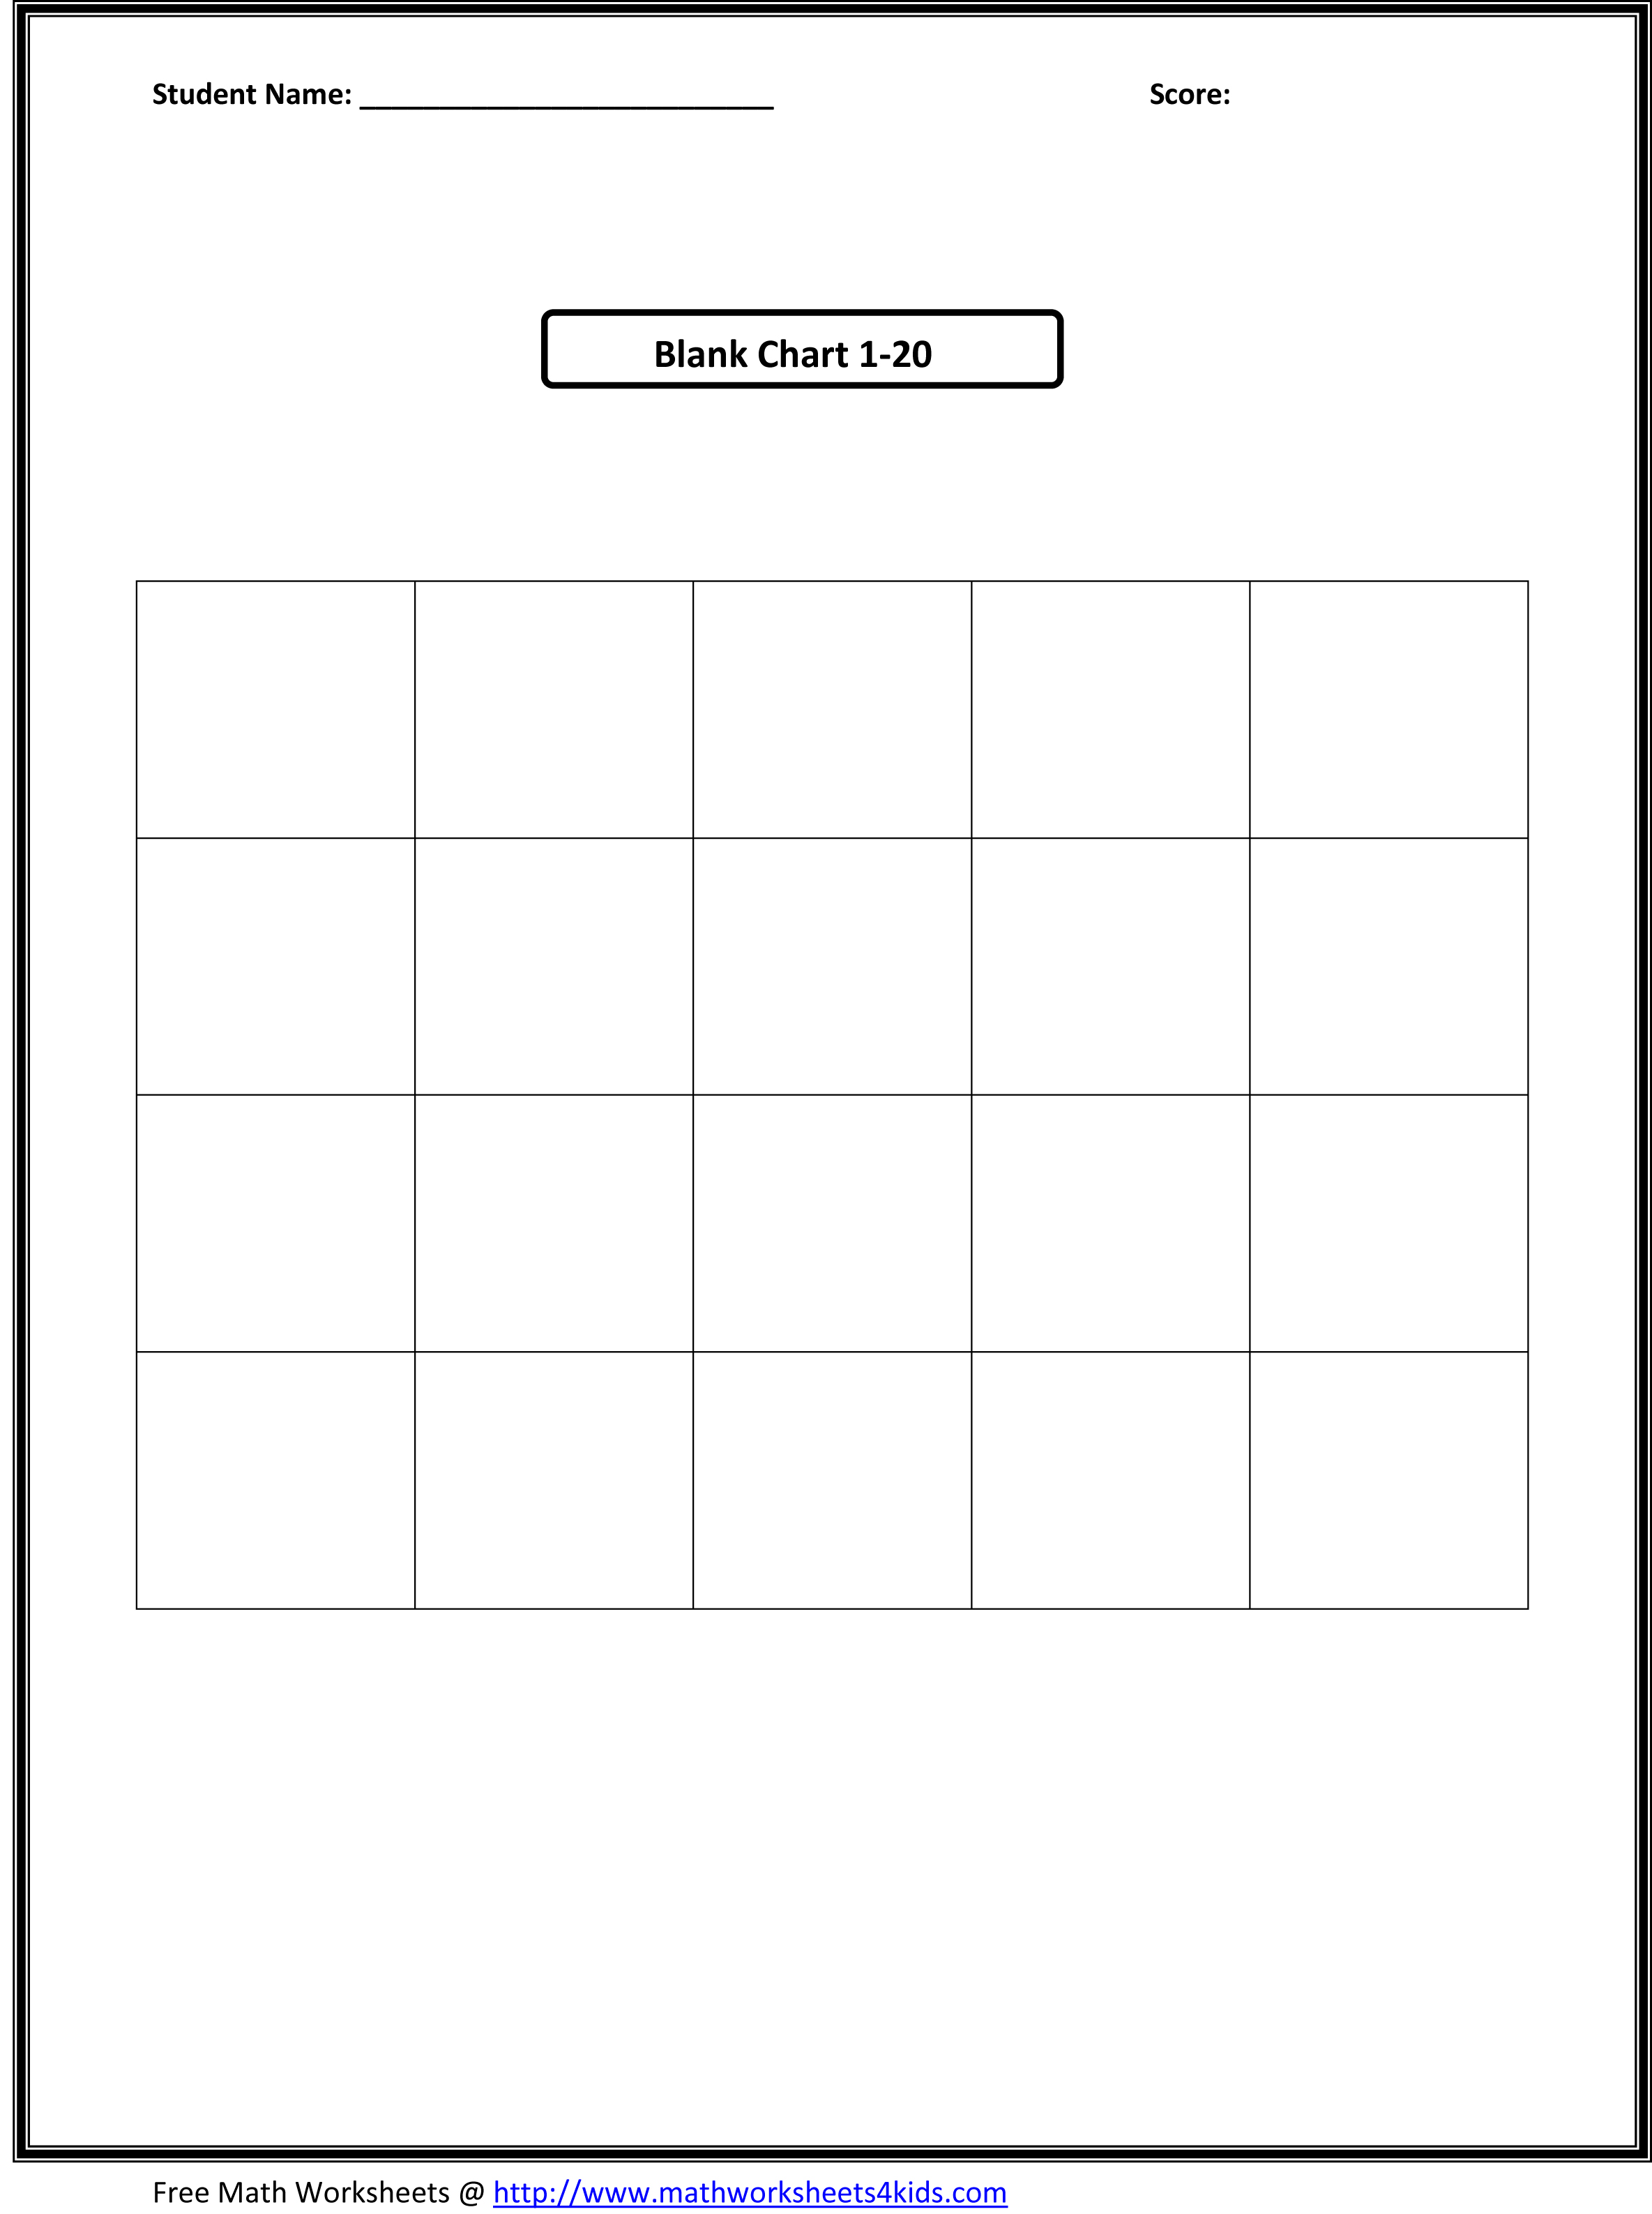 Blank Number Chart 1 20 Image